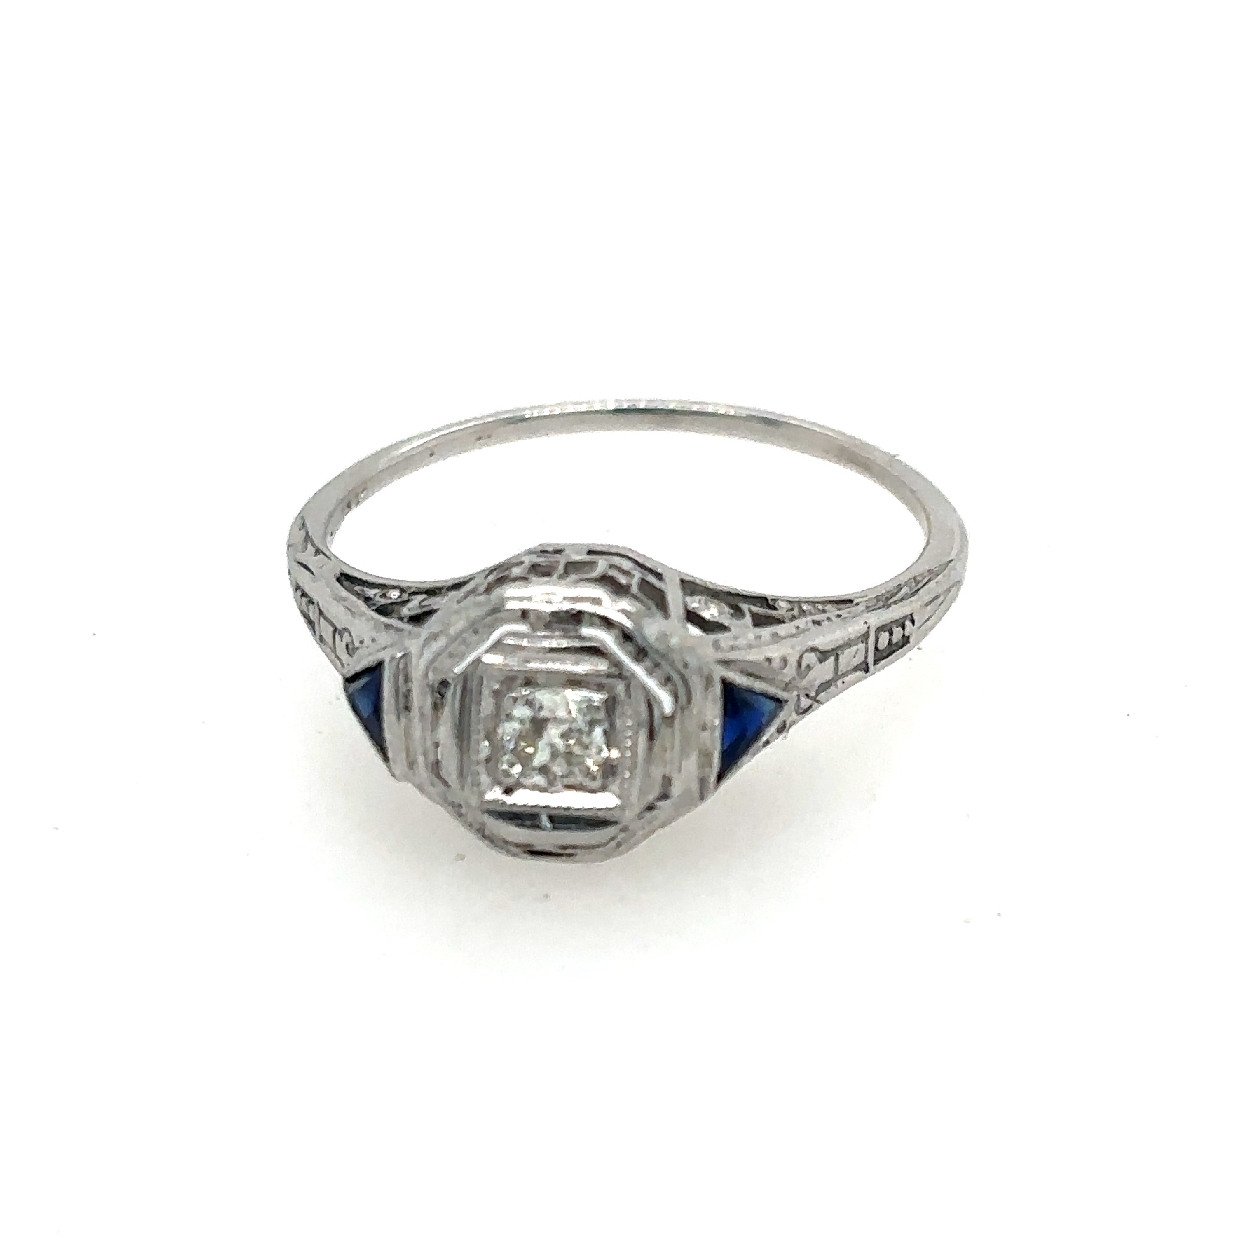 Vintage 18K White Gold Old European Cut Diamond Ring with French Cut Sapphire Accents

Size 4.75